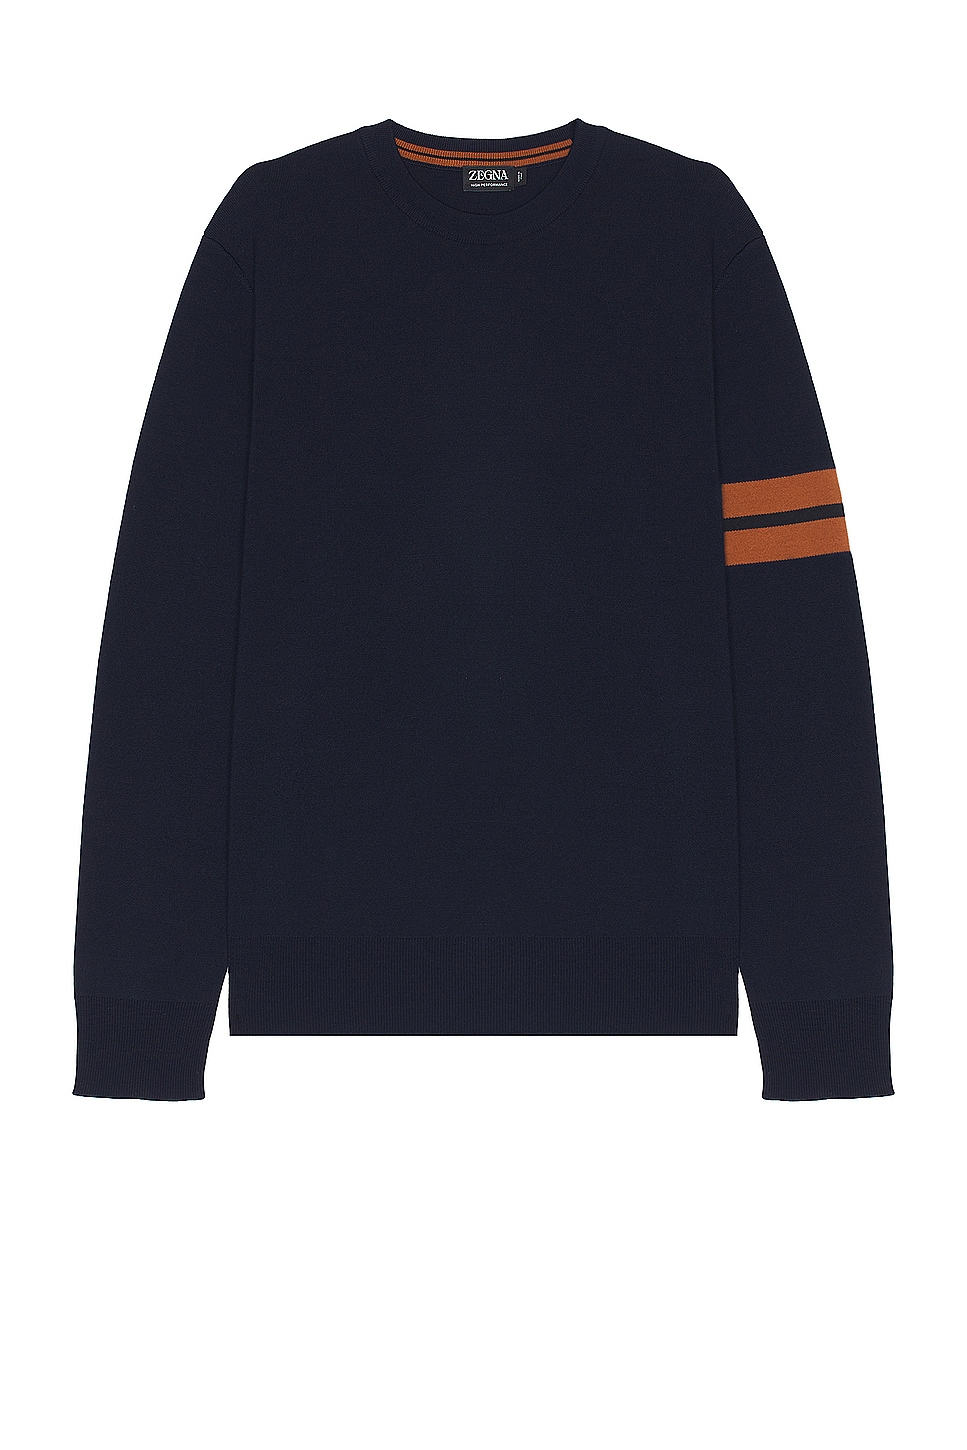 Image 1 of Zegna High Performance Crews Neck Sweater in Navy